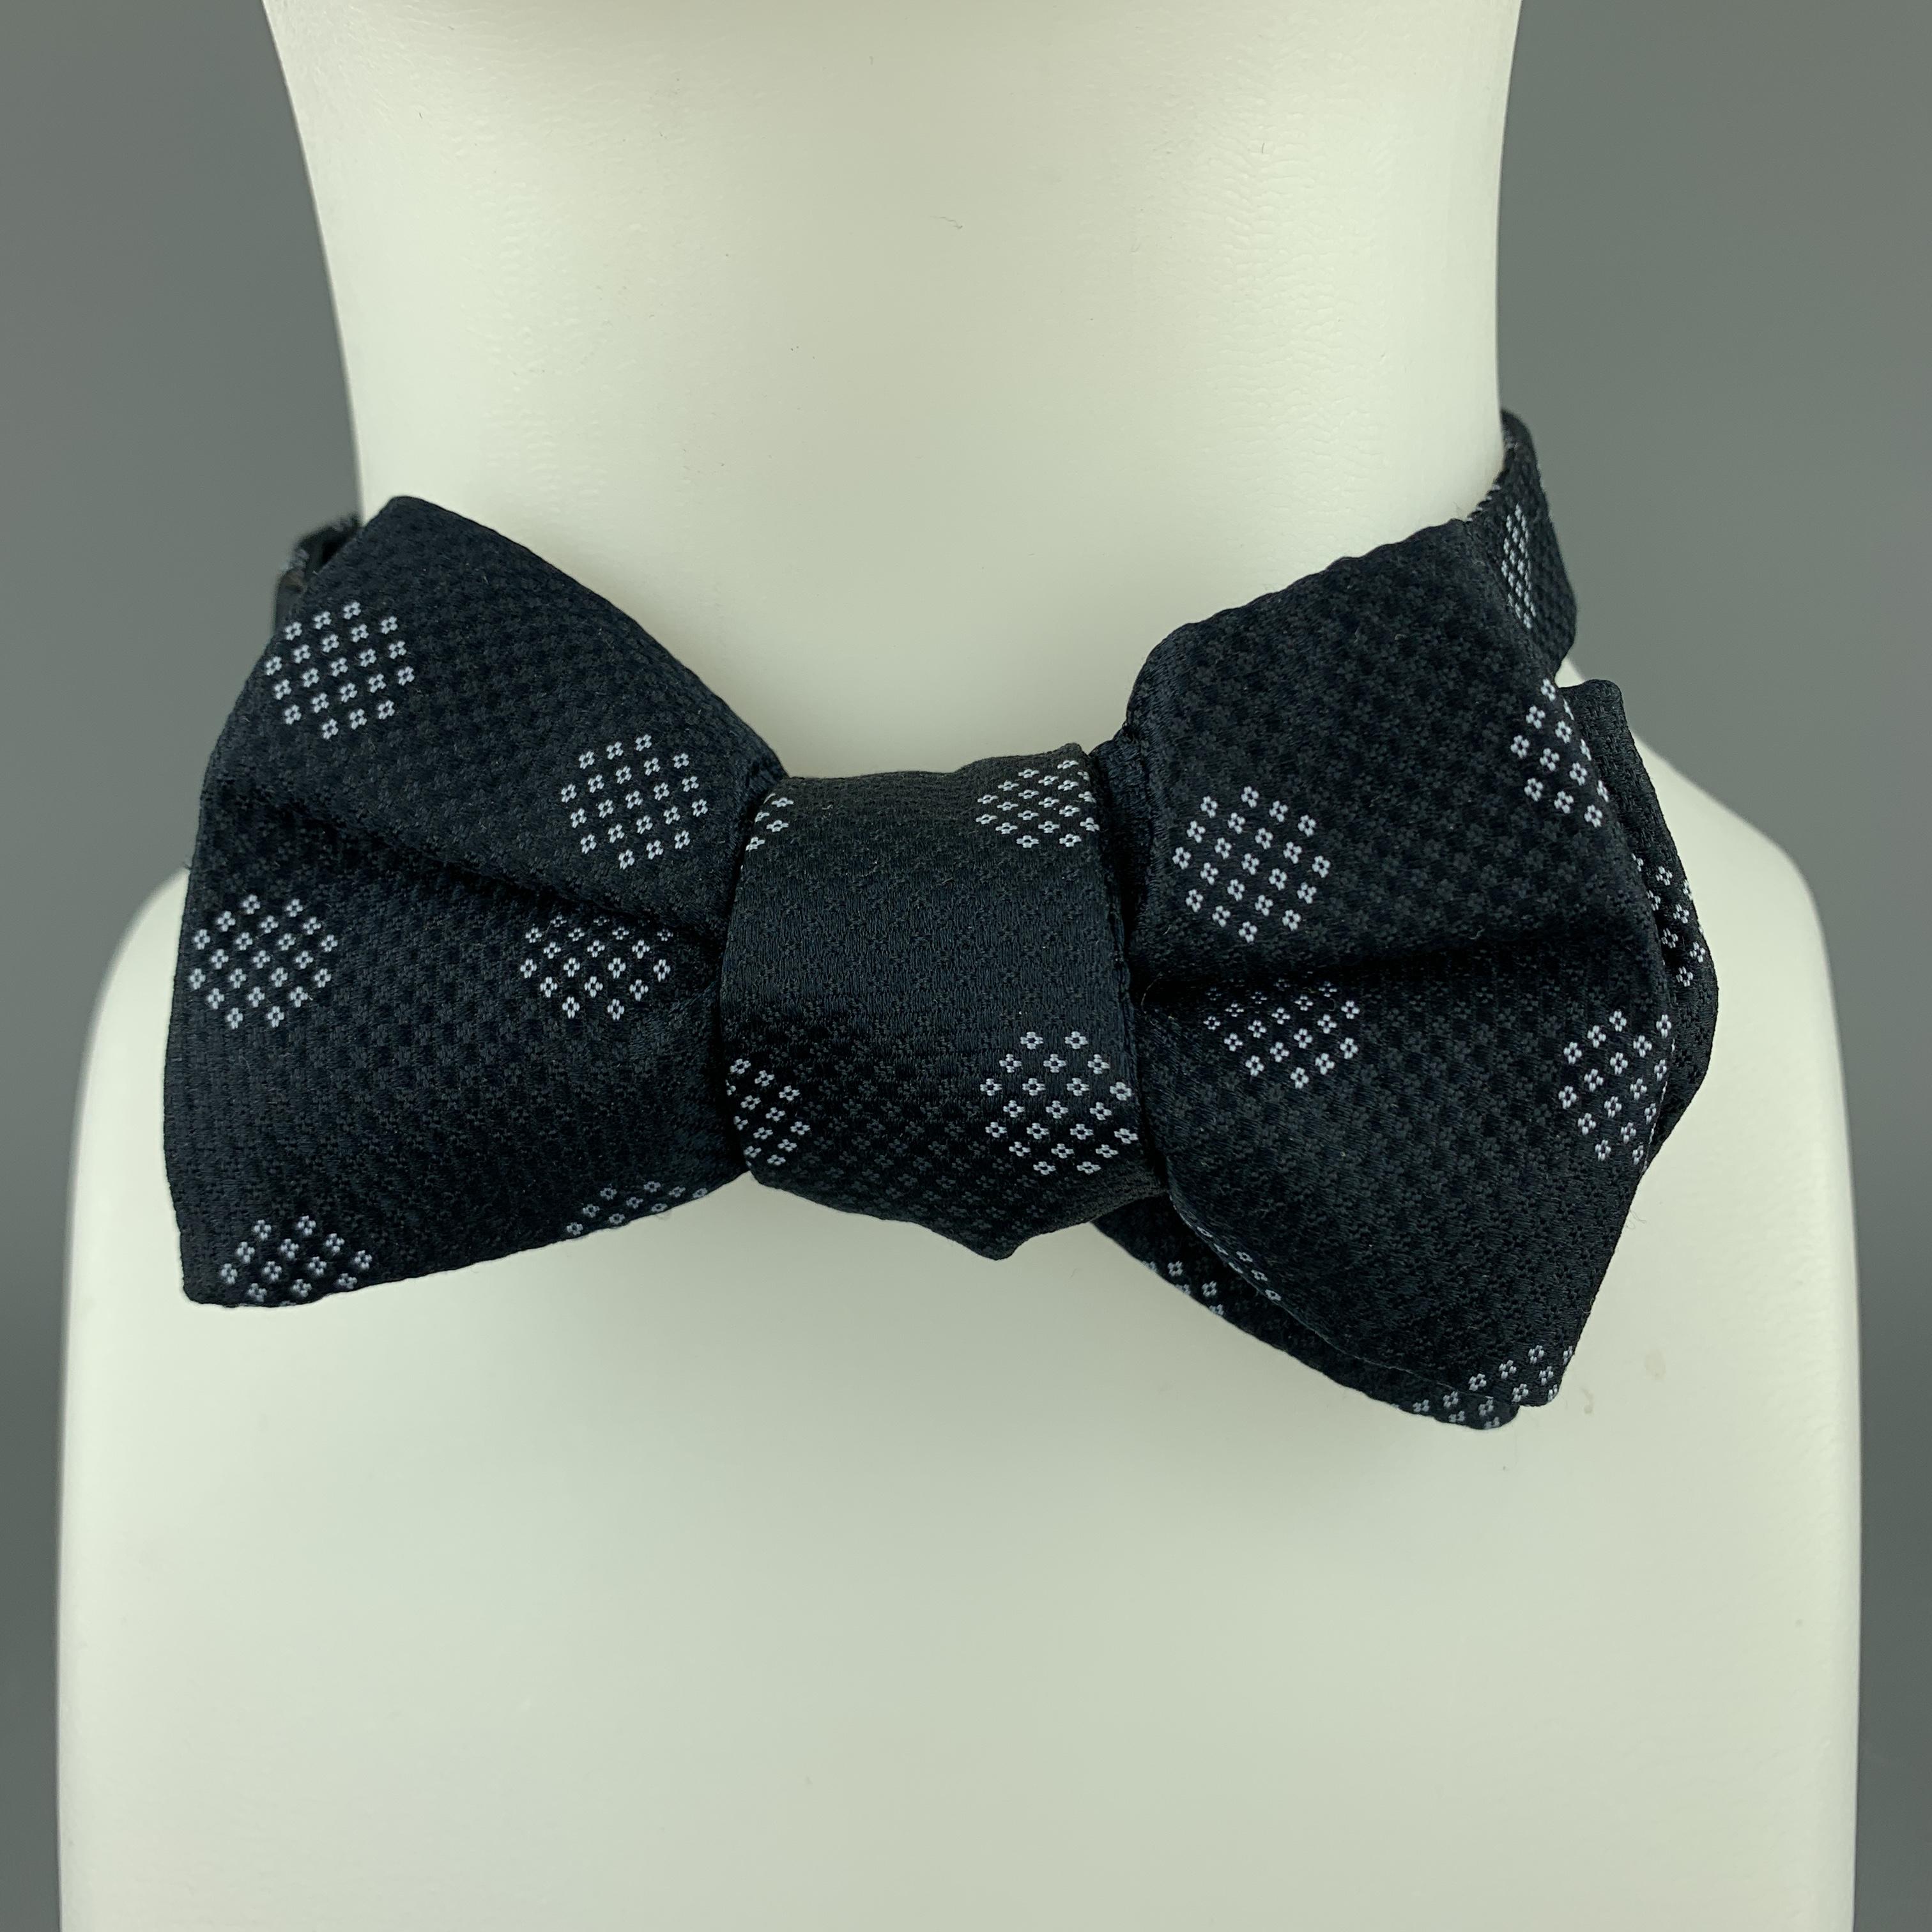 black tie with white spots